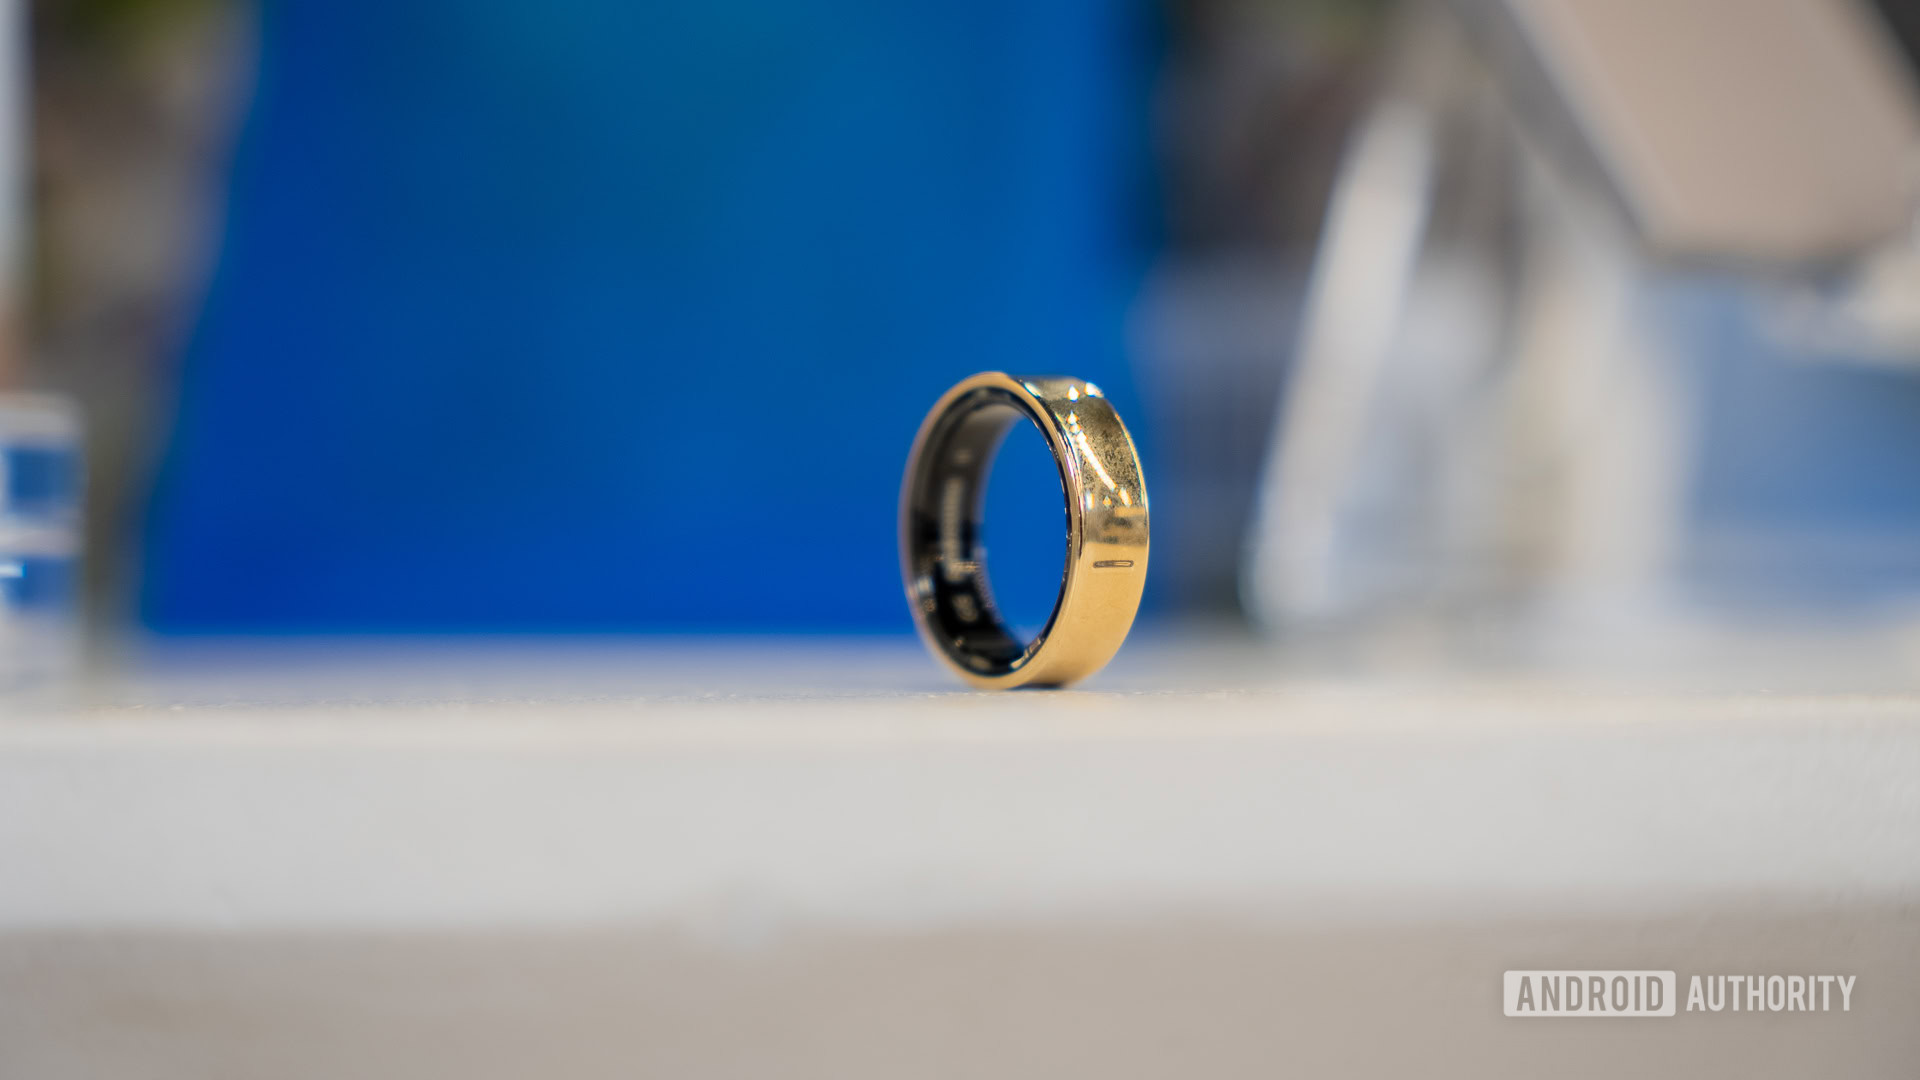 PSA: The Samsung Galaxy Ring works with any Android phone